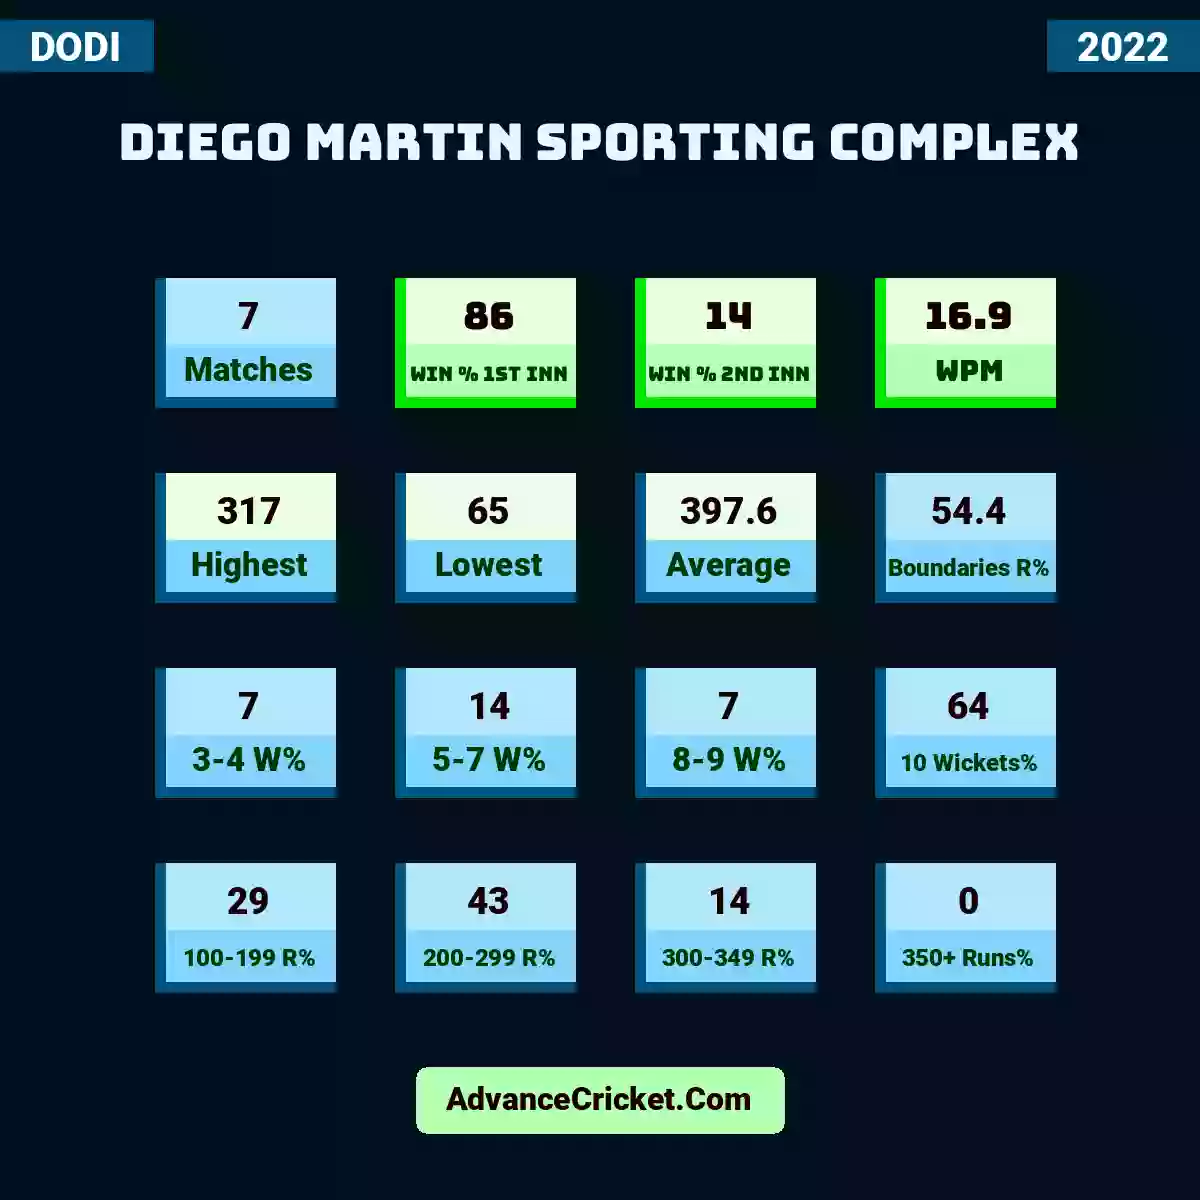 Image showing Diego Martin Sporting Complex with Matches: 7, Win % 1st Inn: 86, Win % 2nd Inn: 14, WPM: 16.9, Highest: 317, Lowest: 65, Average: 397.6, Boundaries R%: 54.4, 3-4 W%: 7, 5-7 W%: 14, 8-9 W%: 7, 10 Wickets%: 64, 100-199 R%: 29, 200-299 R%: 43, 300-349 R%: 14, 350+ Runs%: 0.